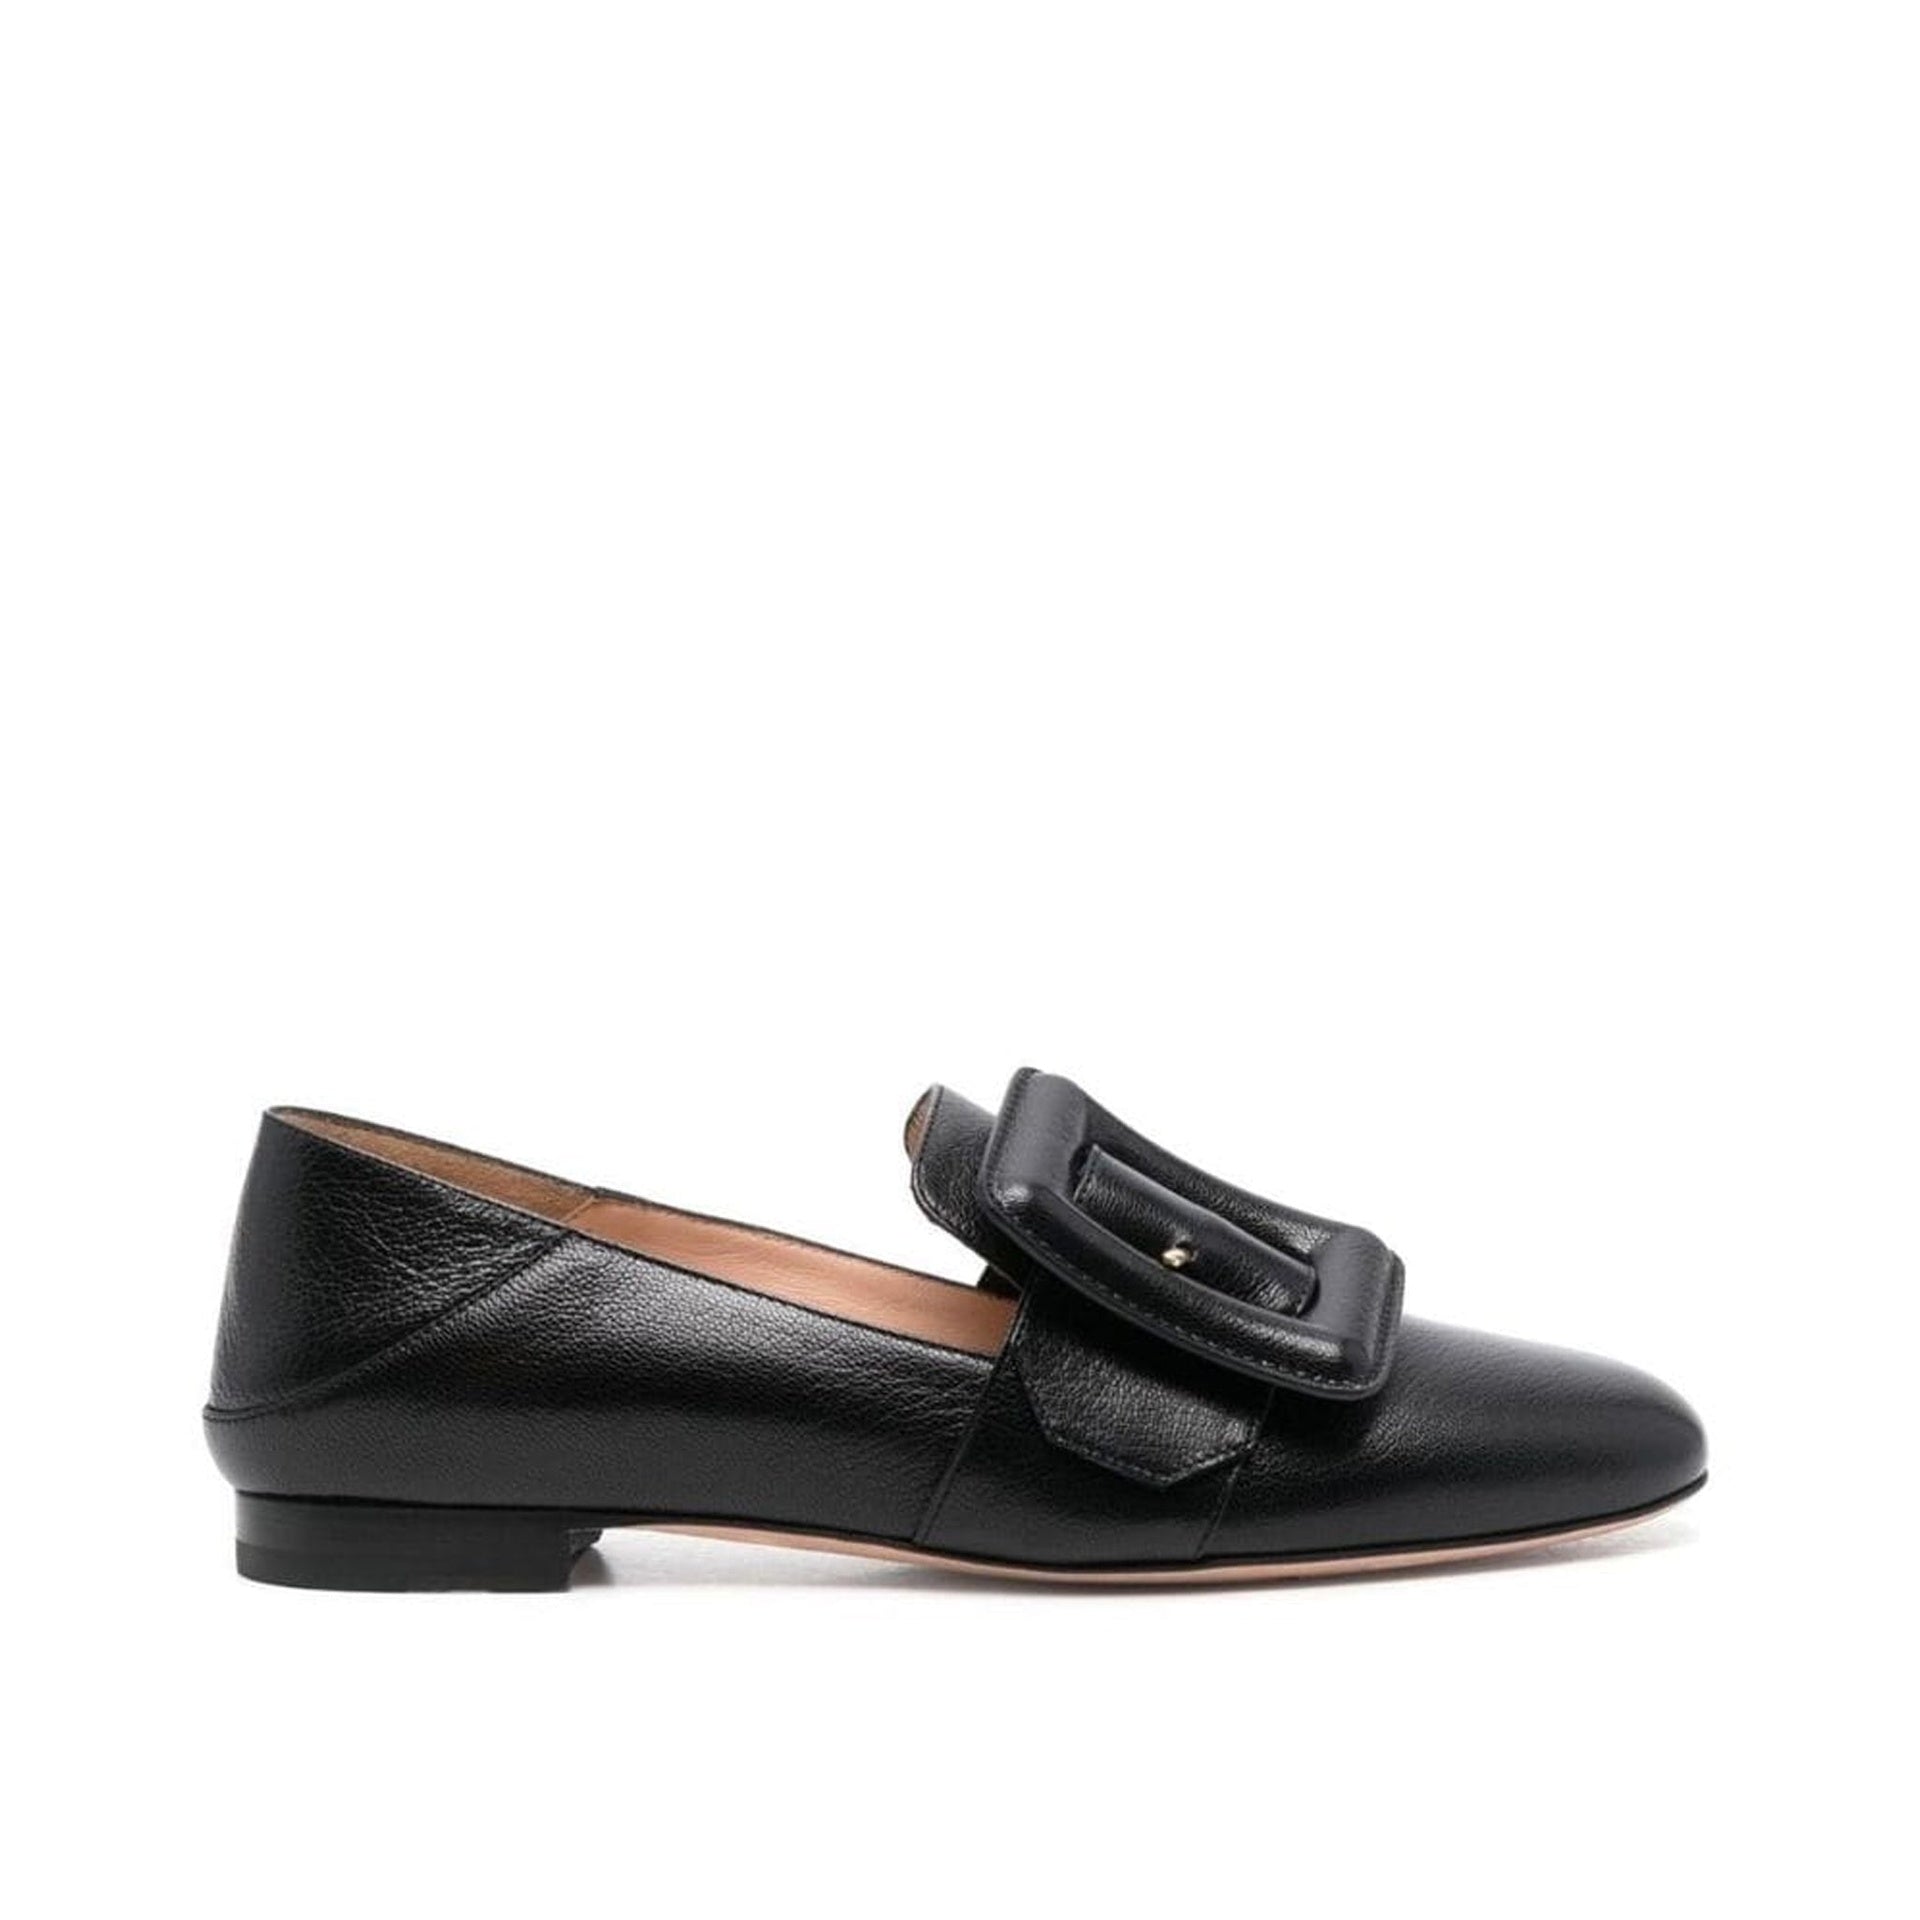 BALLY-OUTLET-SALE-Bally-Janelle-Loafers-Flache-Schuhe-BLACK-35_5-ARCHIVE-COLLECTION.jpg